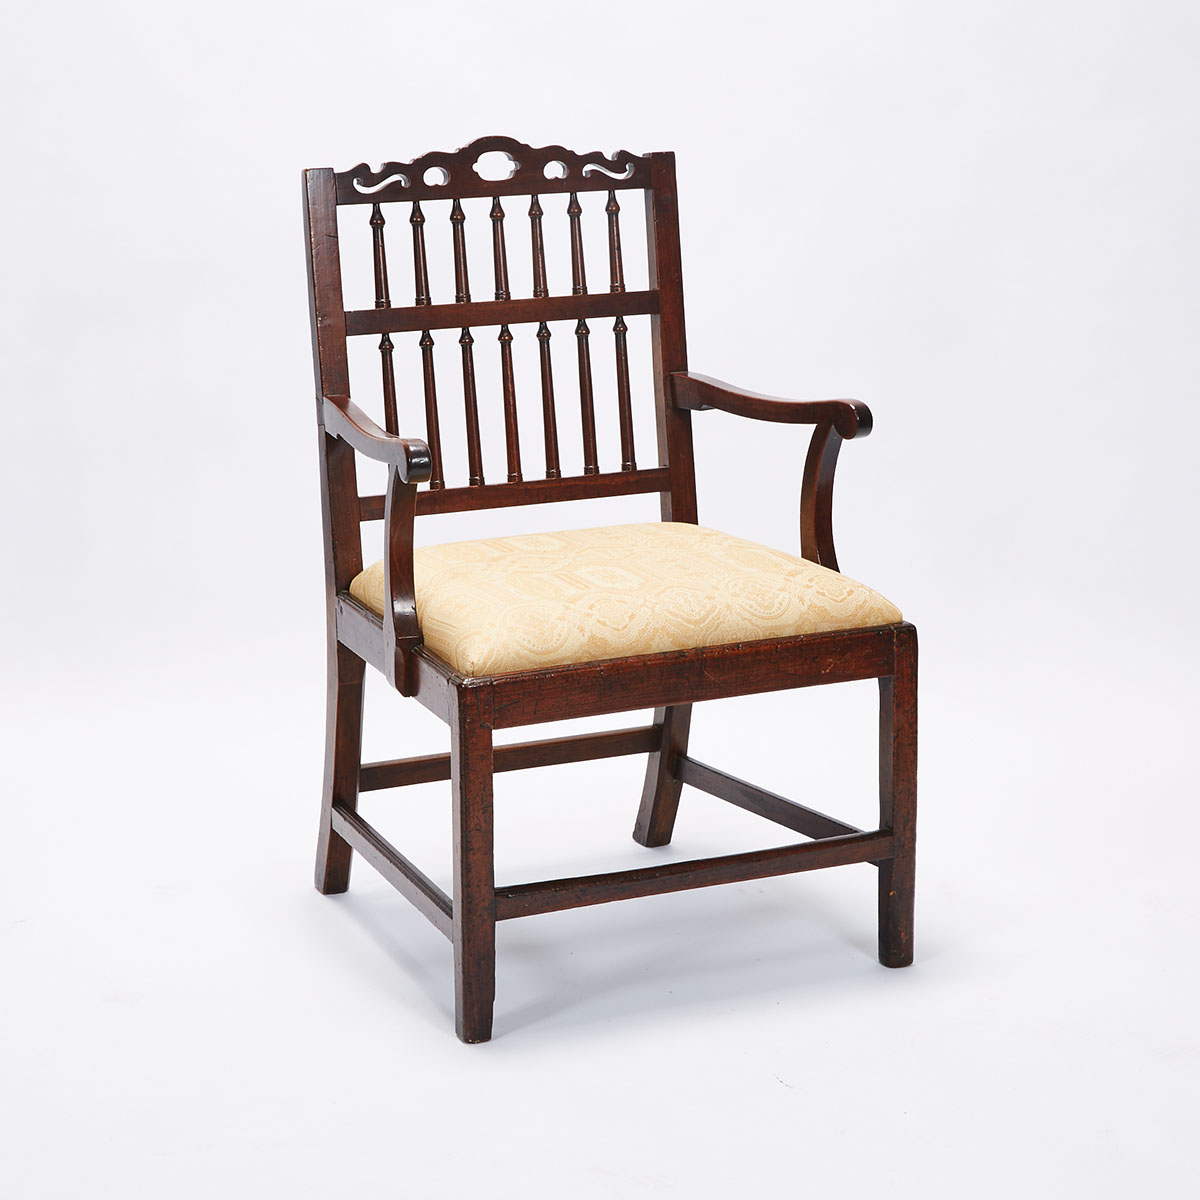 George III Mahogany Spindle Back Open Arm Library Chair, 18th century